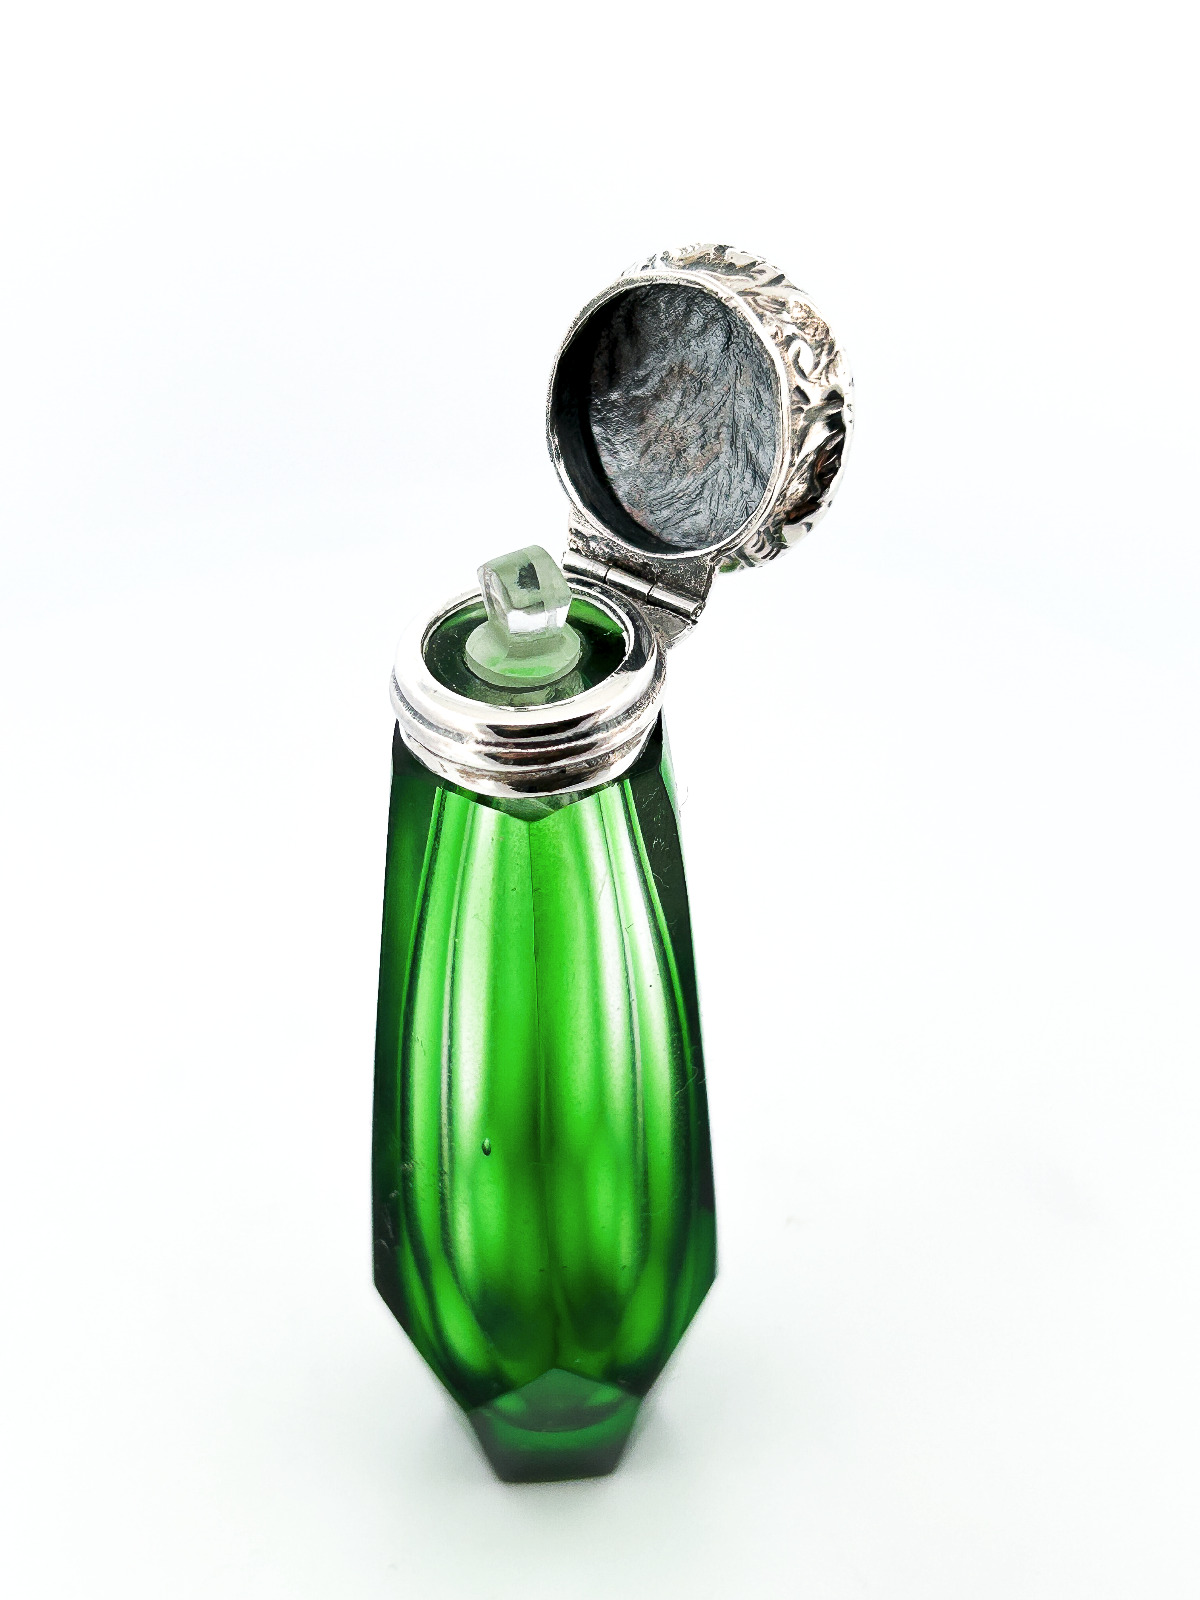 A Faceted Antique Victorian Emerald Green Perfume Bottle